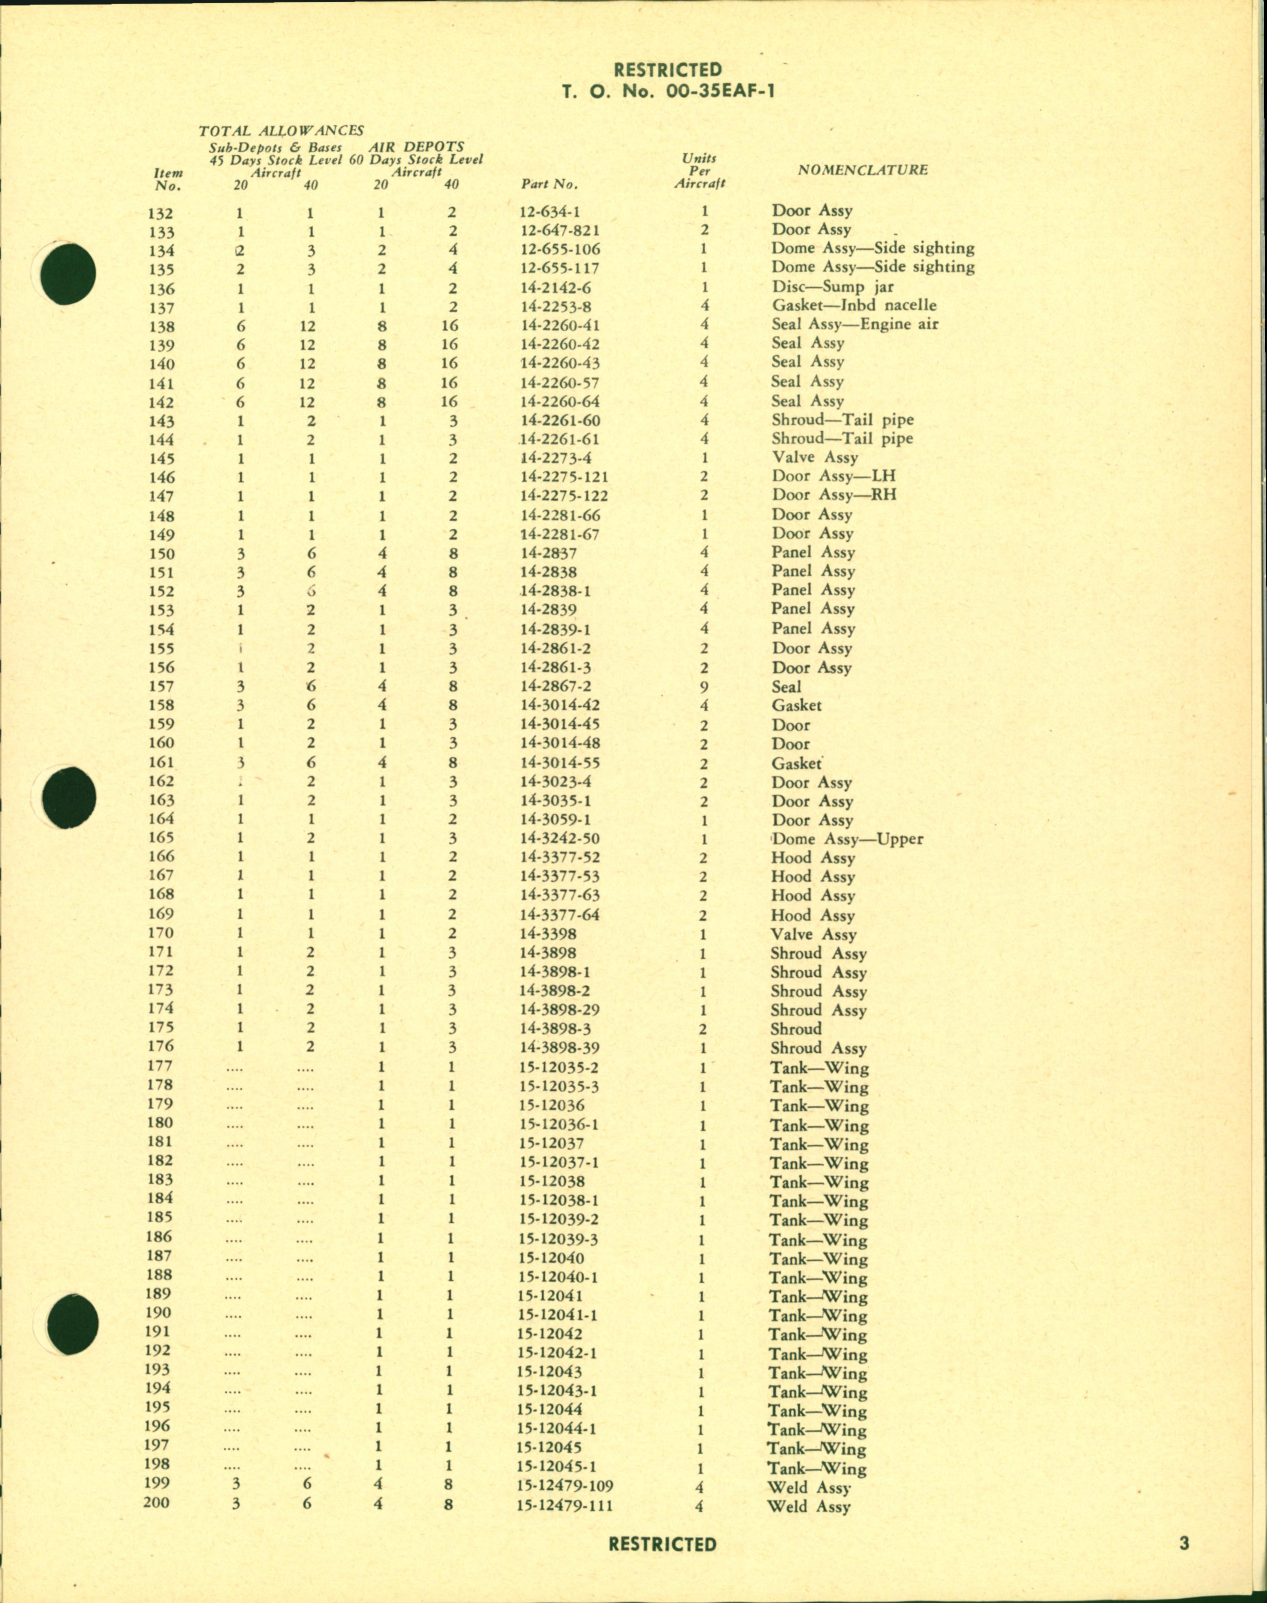 Sample page 5 from AirCorps Library document: Table of Credit - Airplane Maintenance Parts - for B-29 Aircraft